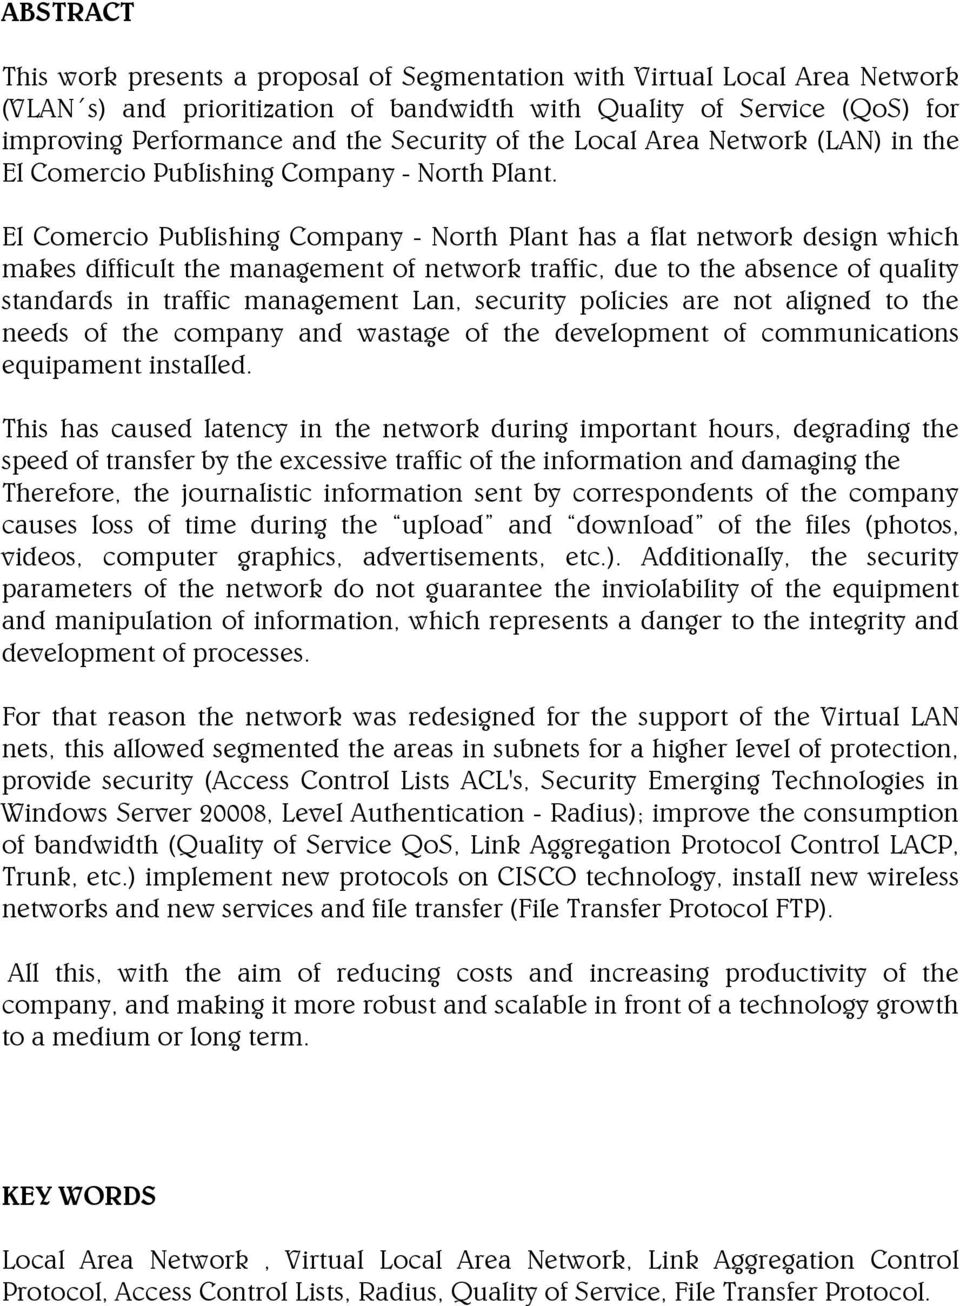 El Comercio Publishing Company - North Plant has a flat network design which makes difficult the management of network traffic, due to the absence of quality standards in traffic management Lan,